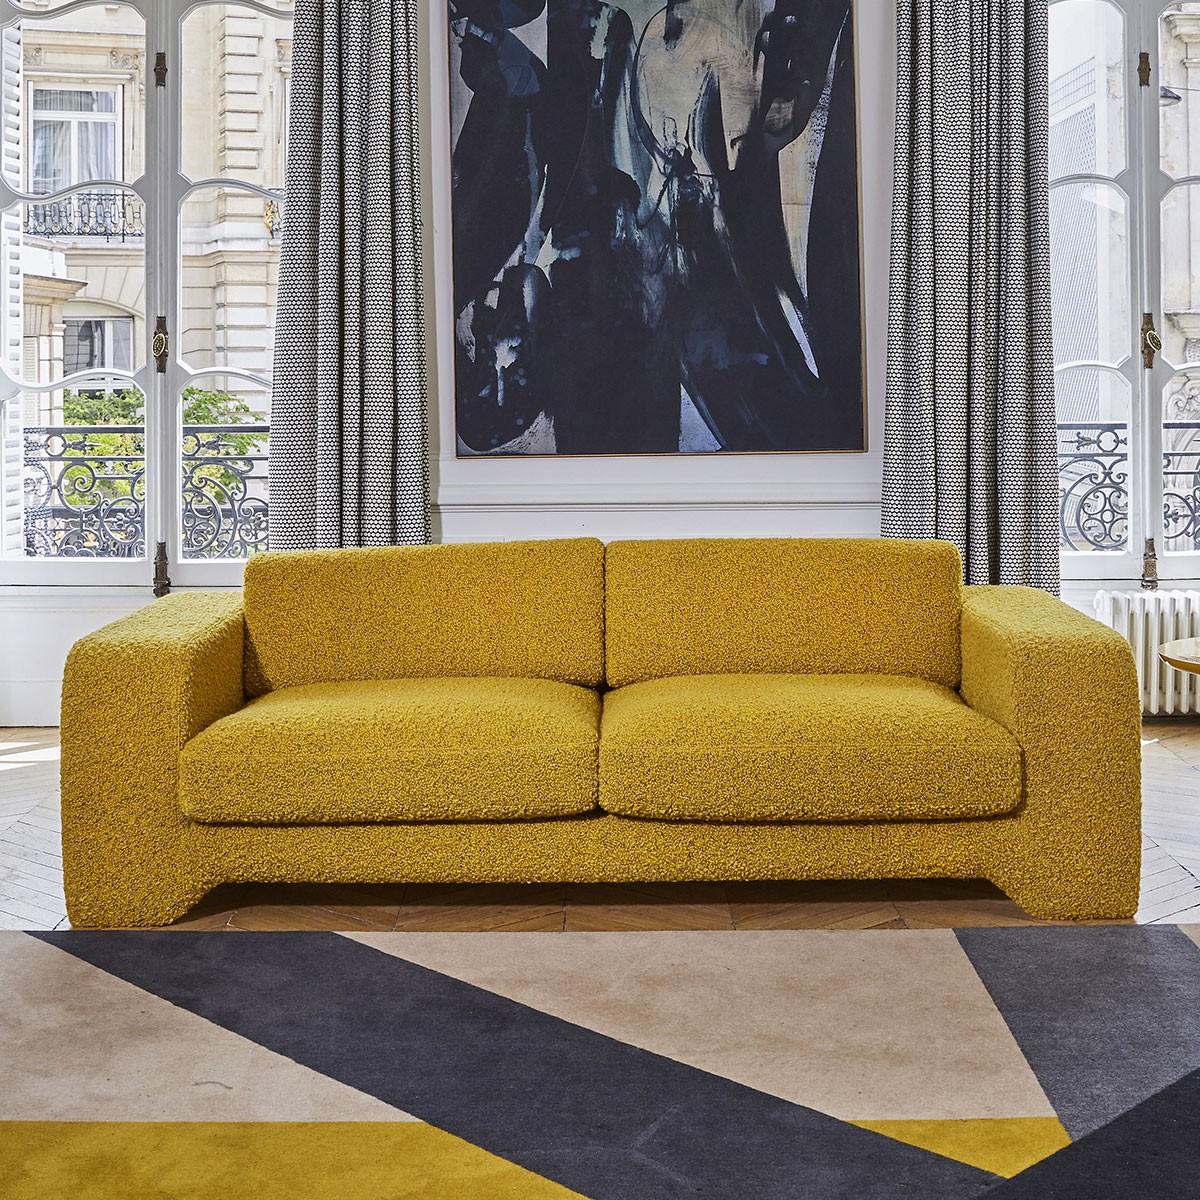 Popus Editions Giovanna 2.5 Seater Sofa in Blue Como Velvet Upholstery.

Giovanna is a sofa with a strong profile. A sober, plush line, with this famous detail that changes everything, so as not to forget its strength of character and this